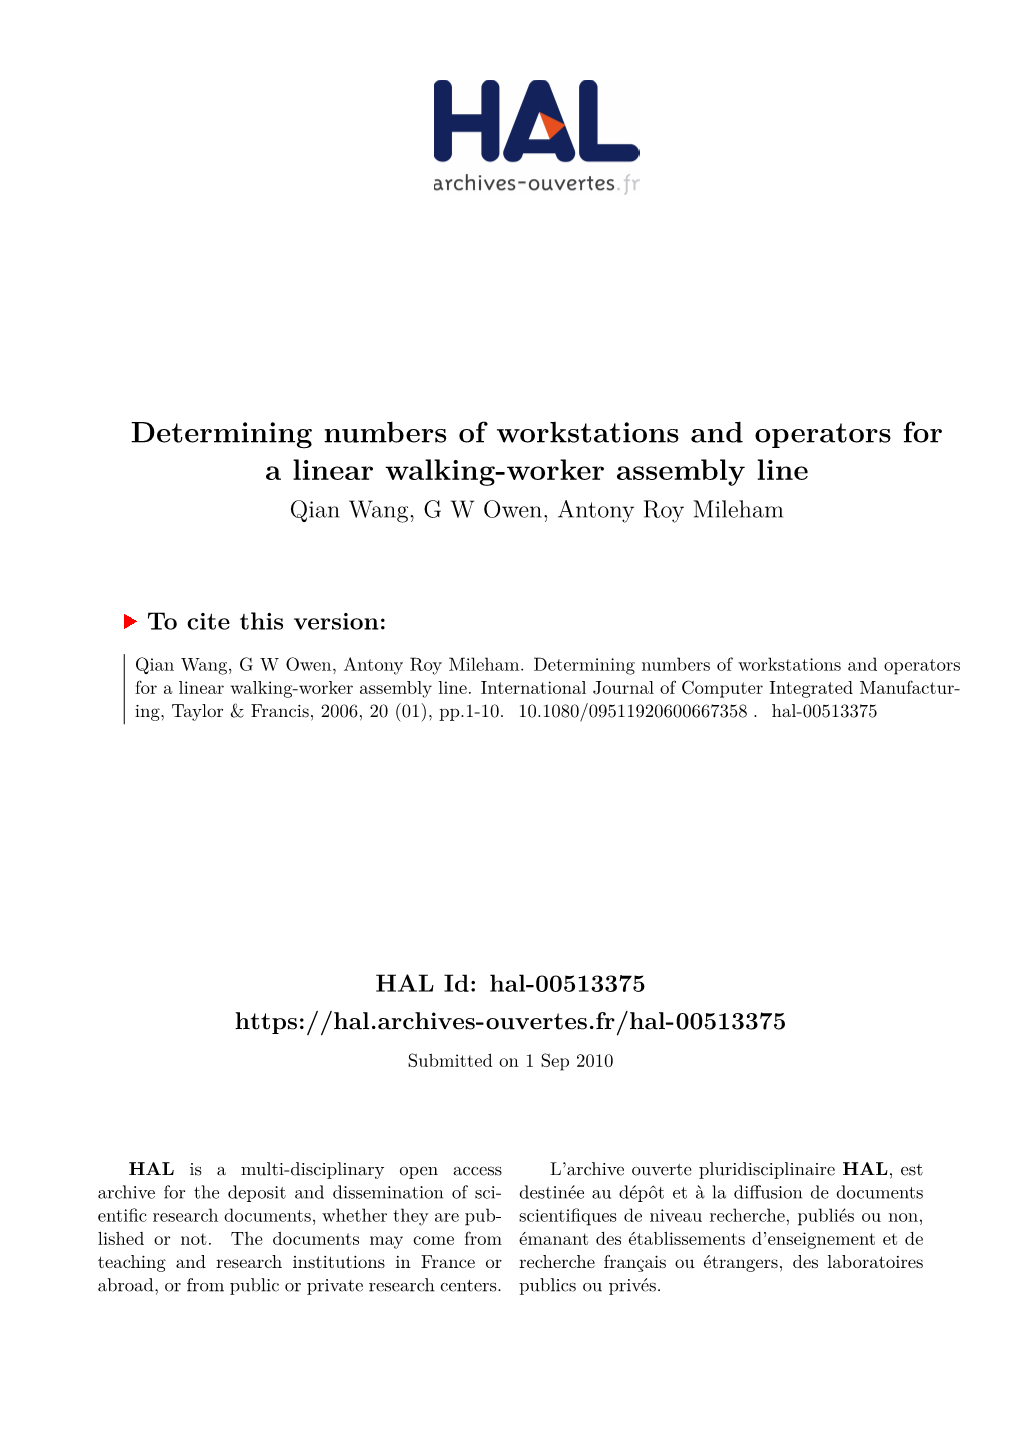 Determining Numbers of Workstations and Operators for a Linear Walking-Worker Assembly Line Qian Wang, G W Owen, Antony Roy Mileham